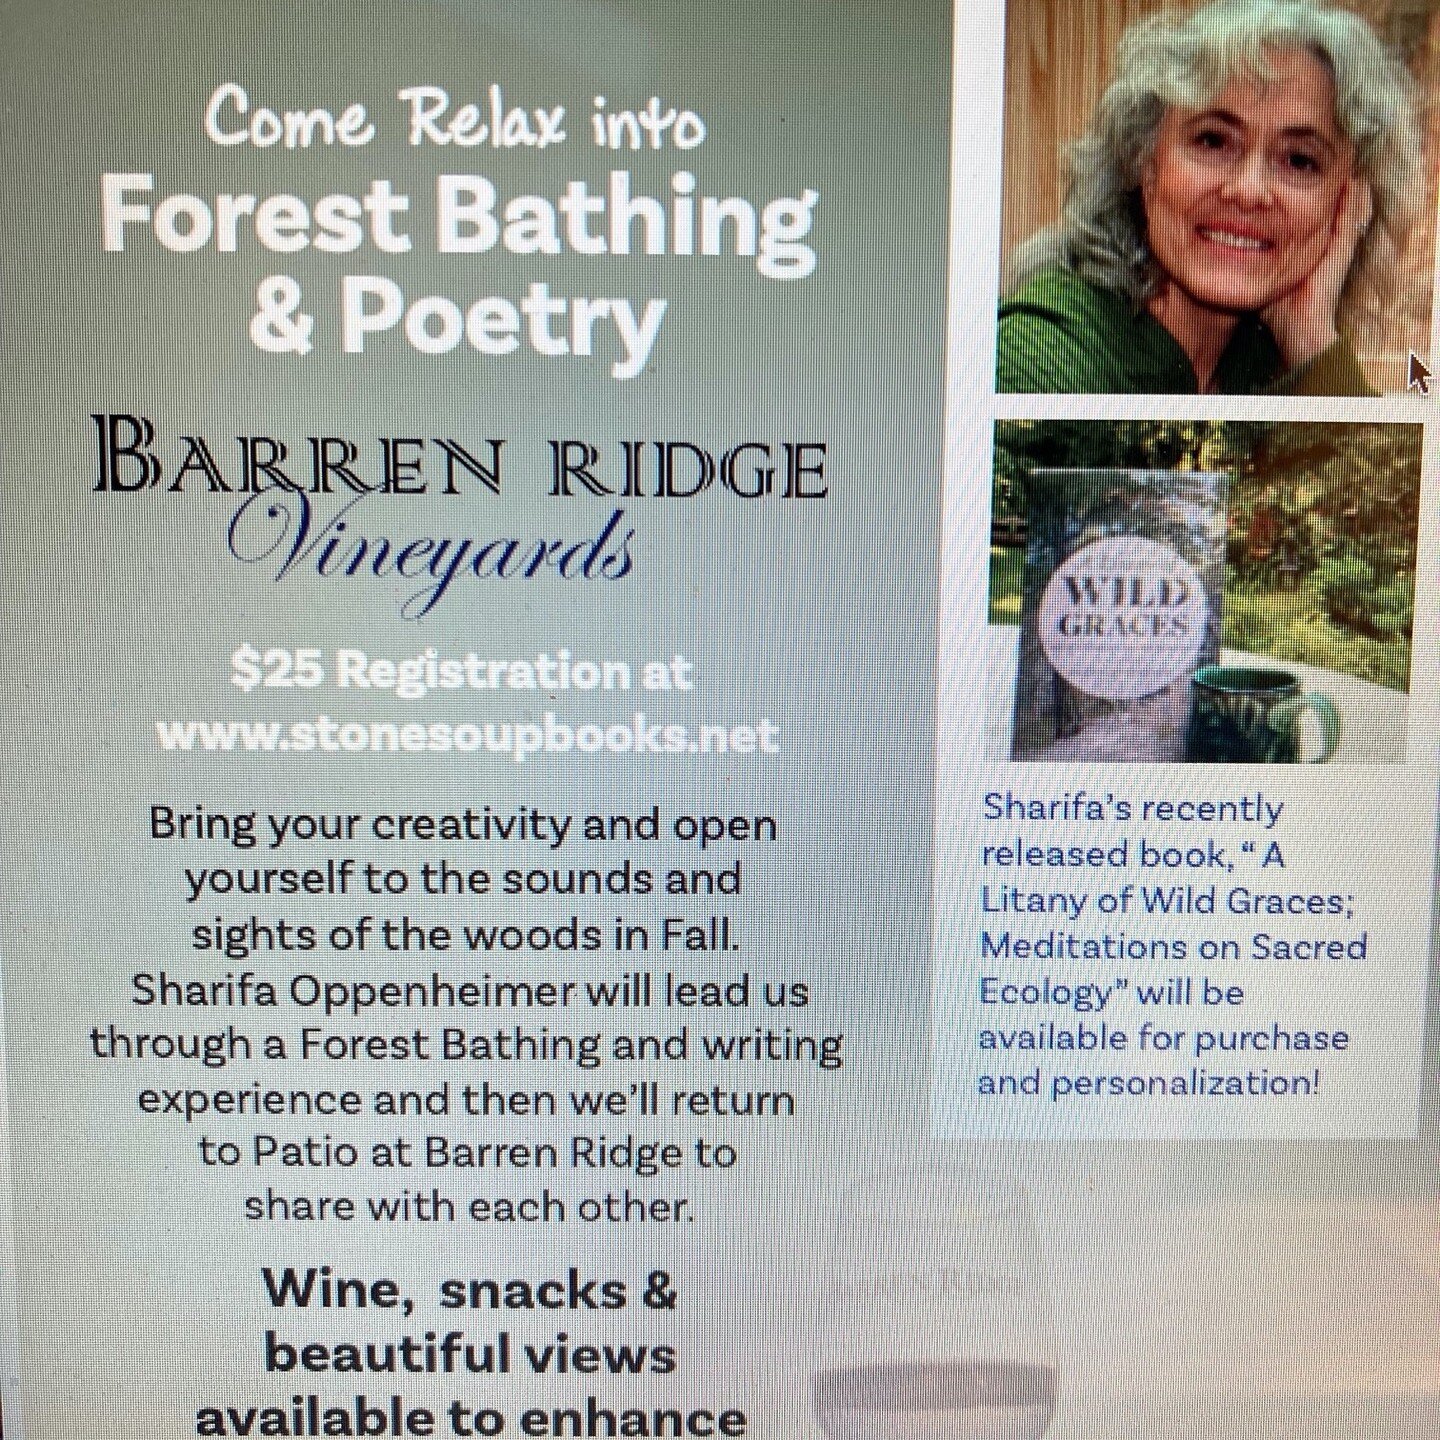 Come Relax Into Forest Bathing &amp; Poetry!

Join me at Barren Ridge Vineyards

Sept 22, 4-6pm
$25 Registration at
www.stonesoupbooks.net

Let&rsquo;s enjoy an afternoon soiree of nature appreciation, poetry and conversation.
Bring your creativity a